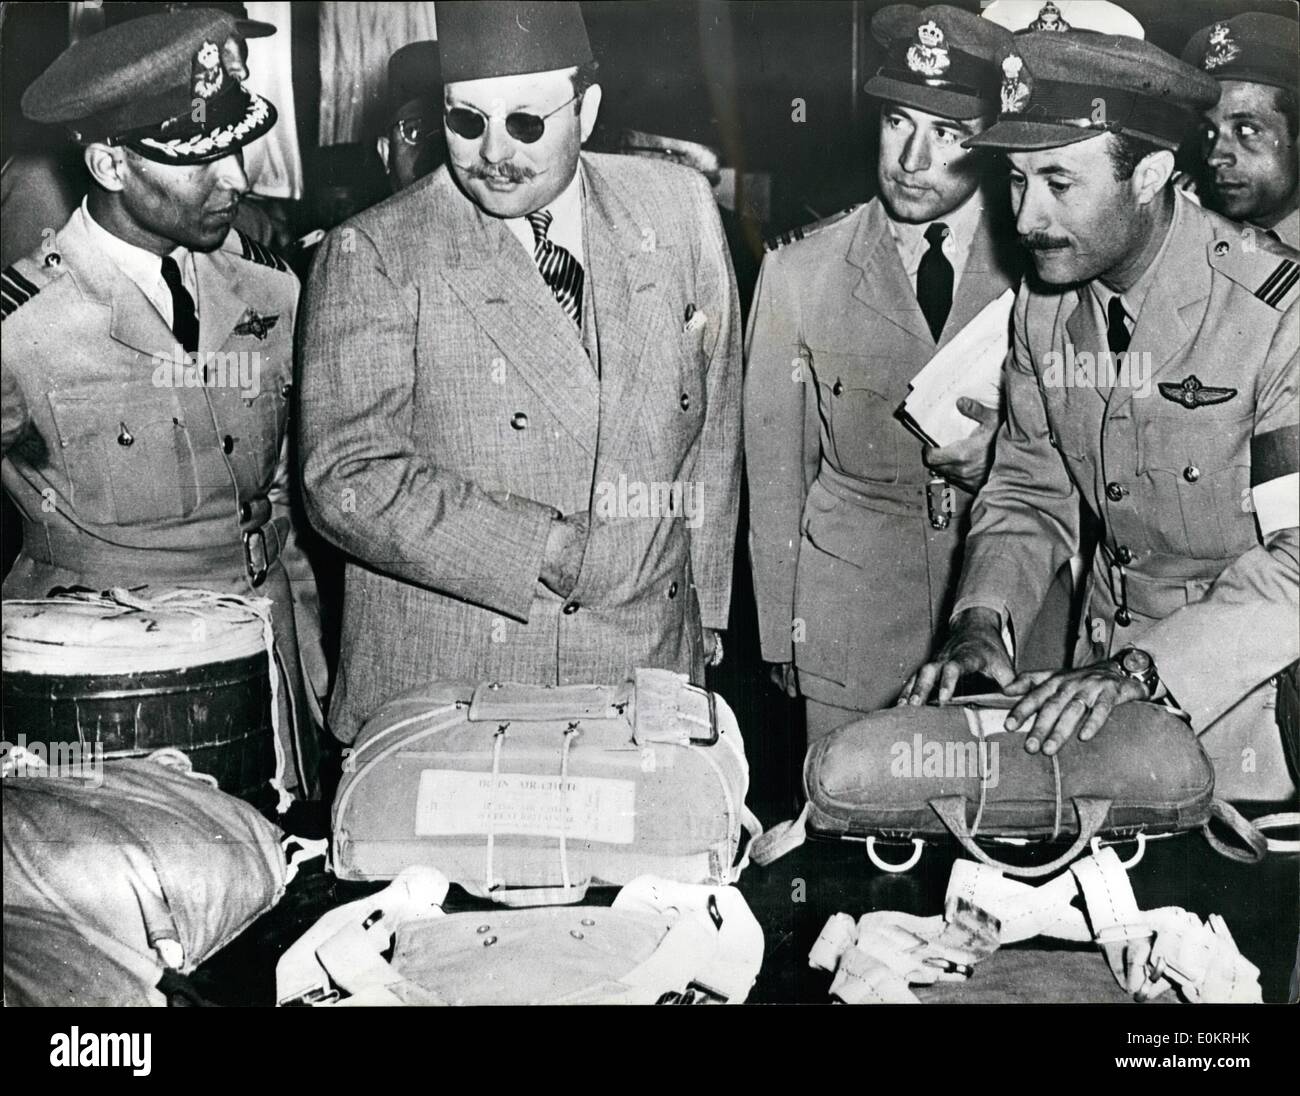 Apr. 04, 1947 - King Farouk Attends Egyptian Air Force Festival In Cairo Royalty And The Equipment: King Farouk of Egypt seen as he inspects some of the equipment when he attended the Egyptian Royal Air Force Festival in Cairo, recently. A display of low flying was a feature of the festival. Stock Photo